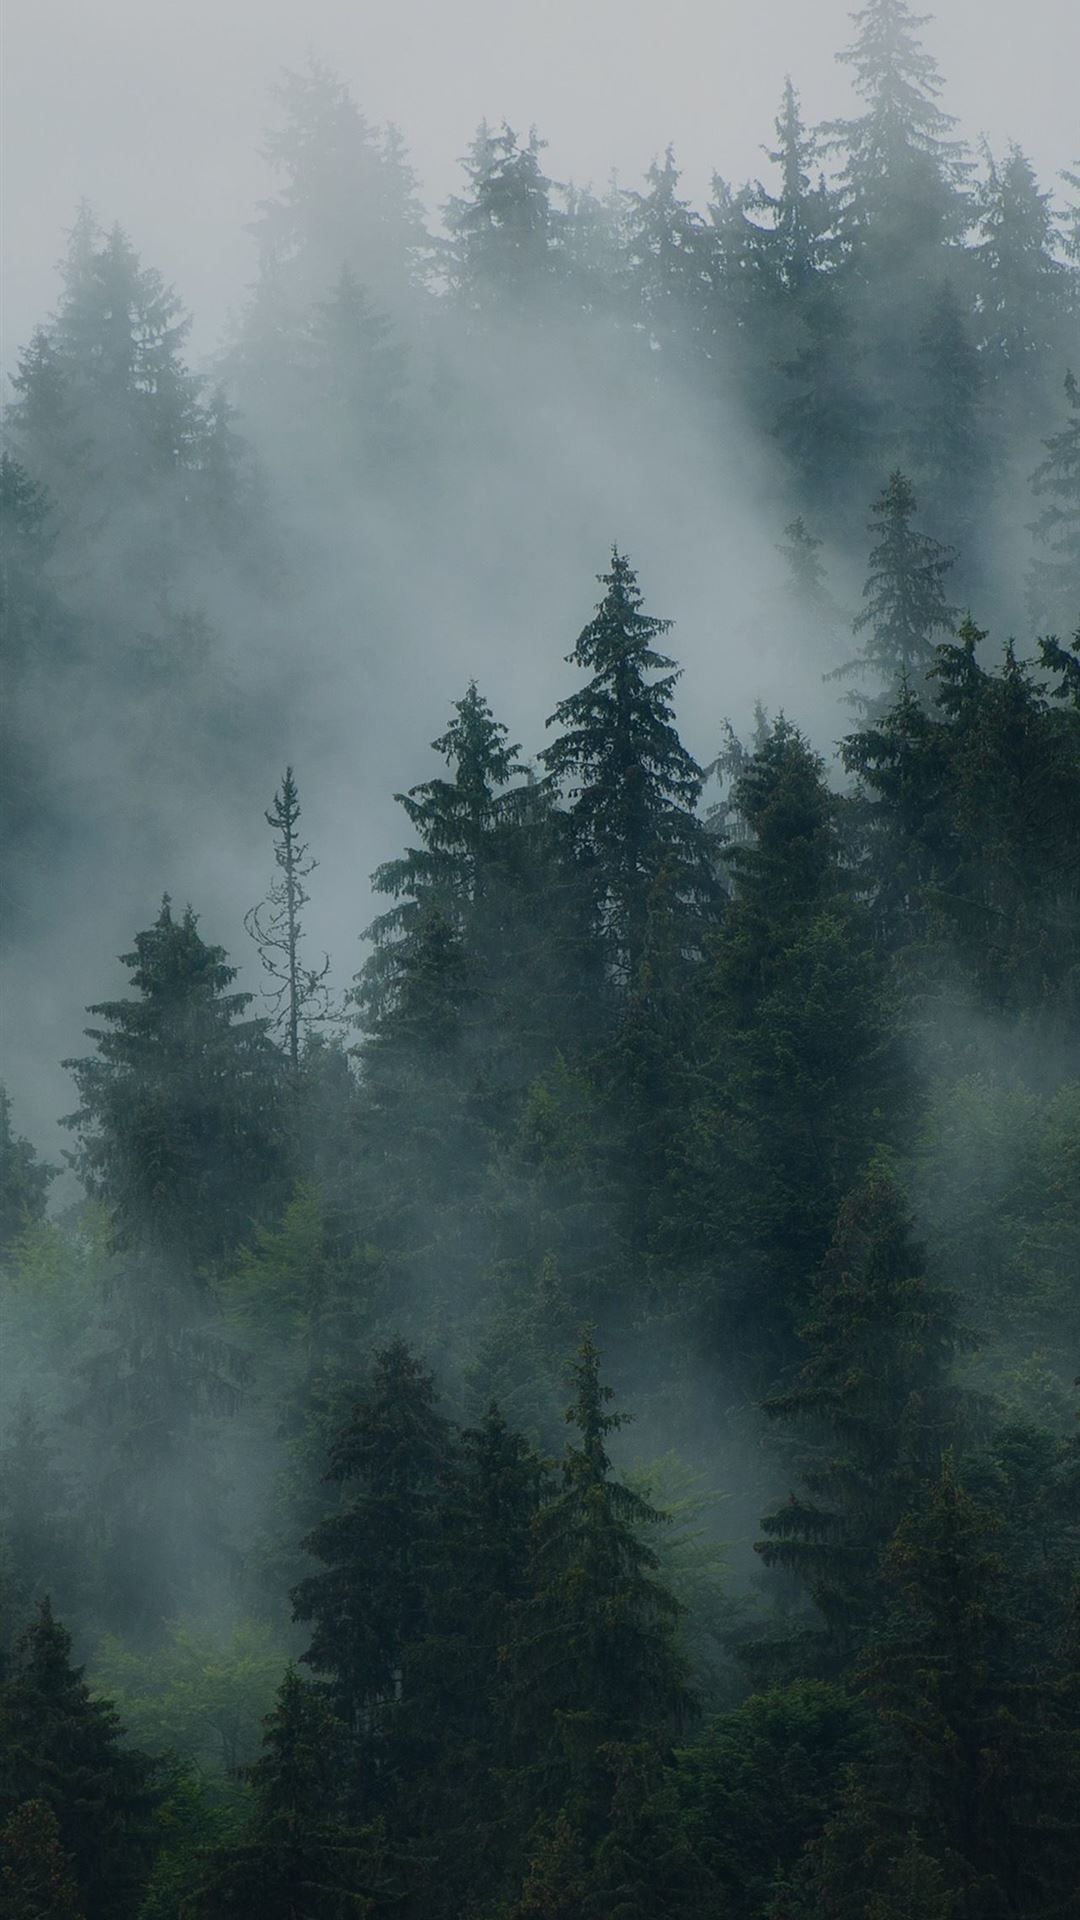 IPhone wallpaper of a foggy forest with pine trees. - Fog